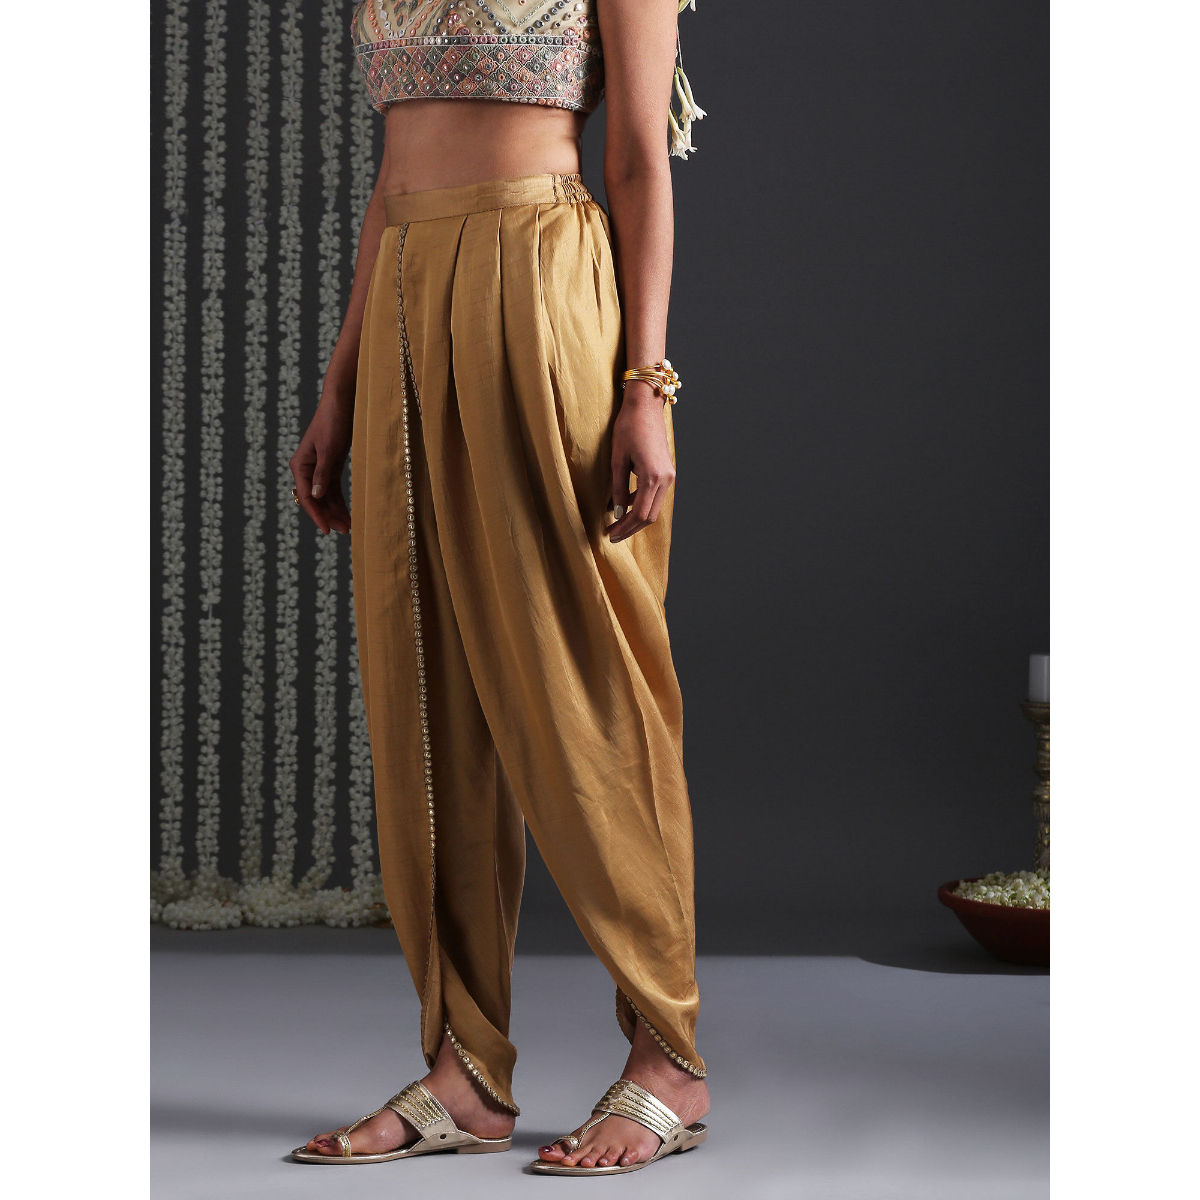 INDYA X PAYAL SINGHAL Women Green Solid Dhoti Pants With Attached Dupatta -  Absolutely Desi